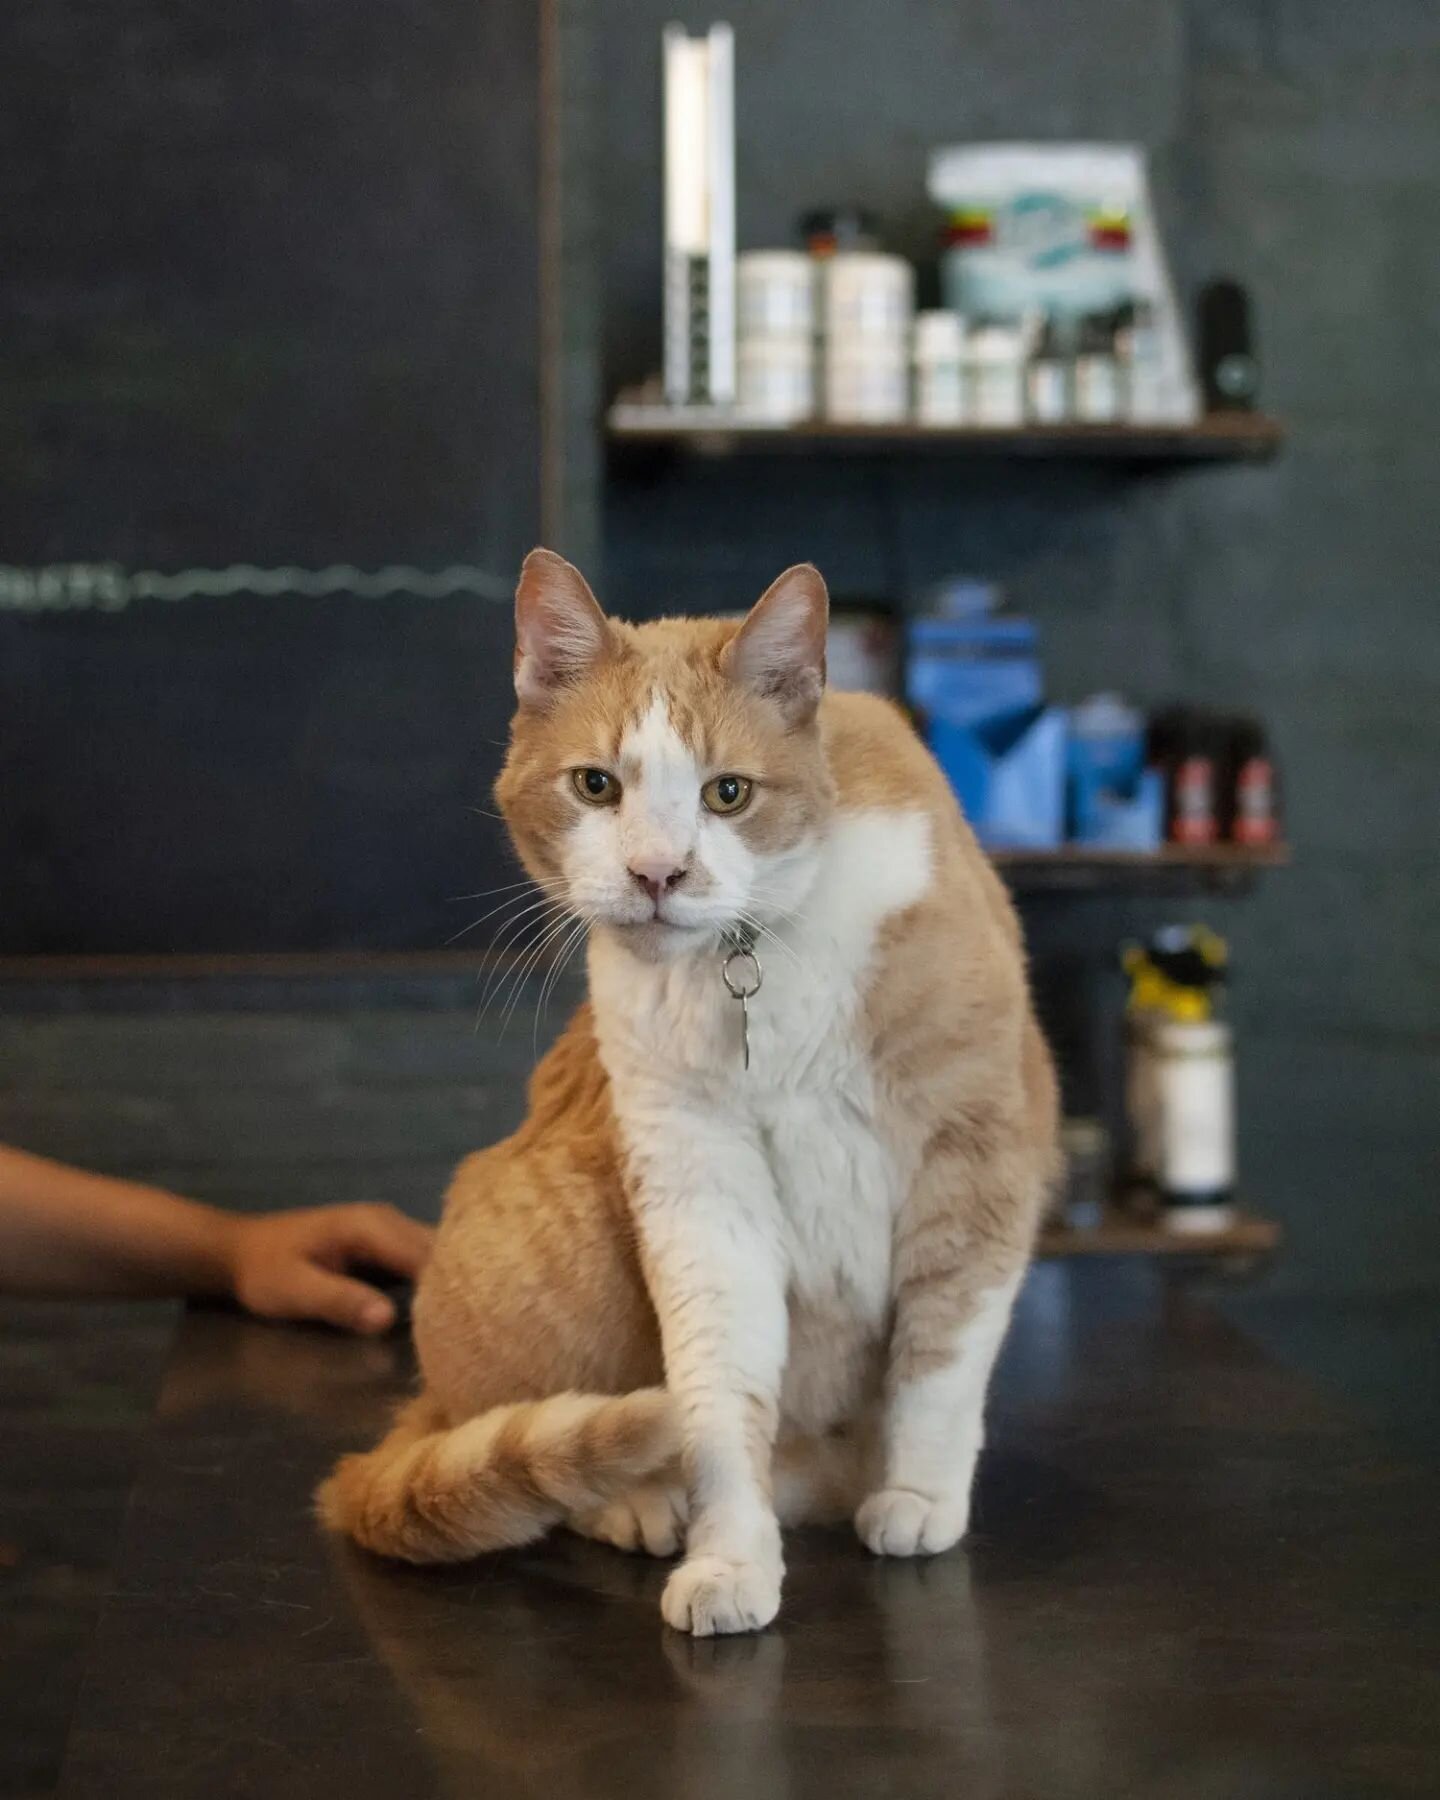 With heavy hearts, we announce the passing of our beloved Falkor. As a stray already over a decade old, he came wandering into our shop in 2013 and has been in our hearts ever since, where he shall live on in cherished memory. He was our friend, our 